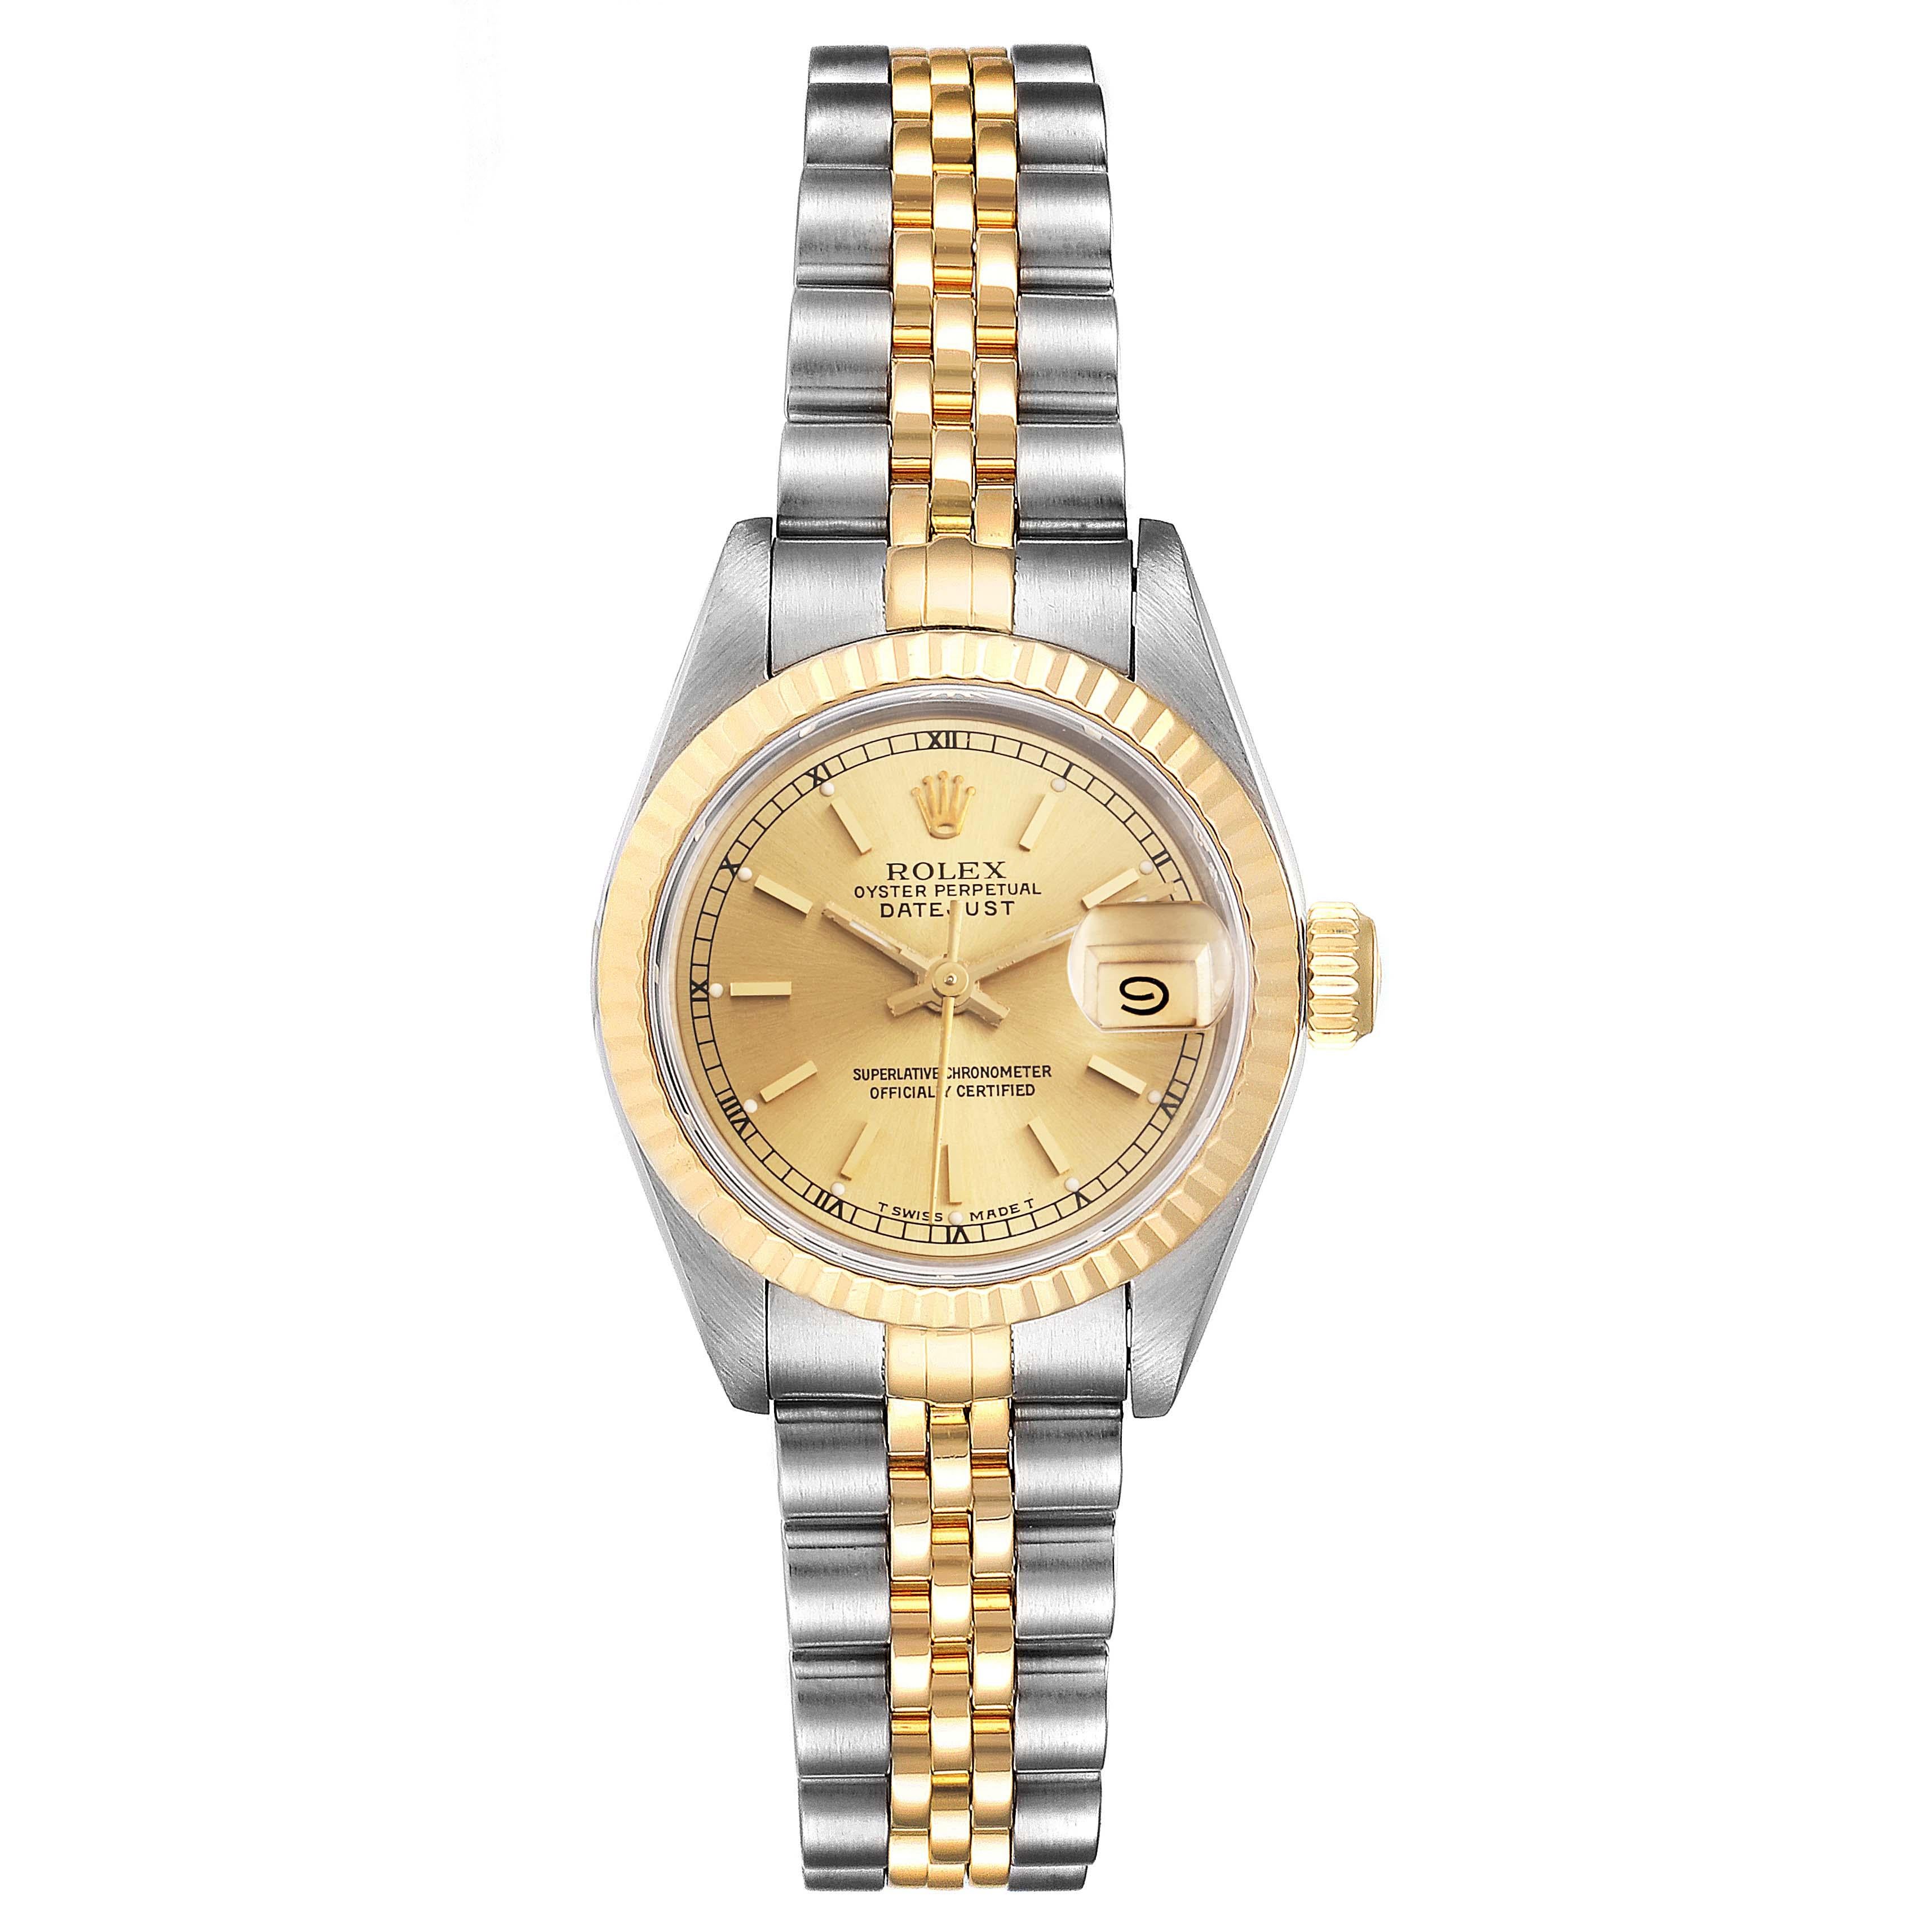 Rolex Datejust Steel 18K Yellow Gold Ladies Watch 69173 Box Papers. Officially certified chronometer self-winding movement. Stainless steel oyster case 26.0 mm in diameter. Rolex logo on a crown. 18k yellow gold fluted bezel. Scratch resistant